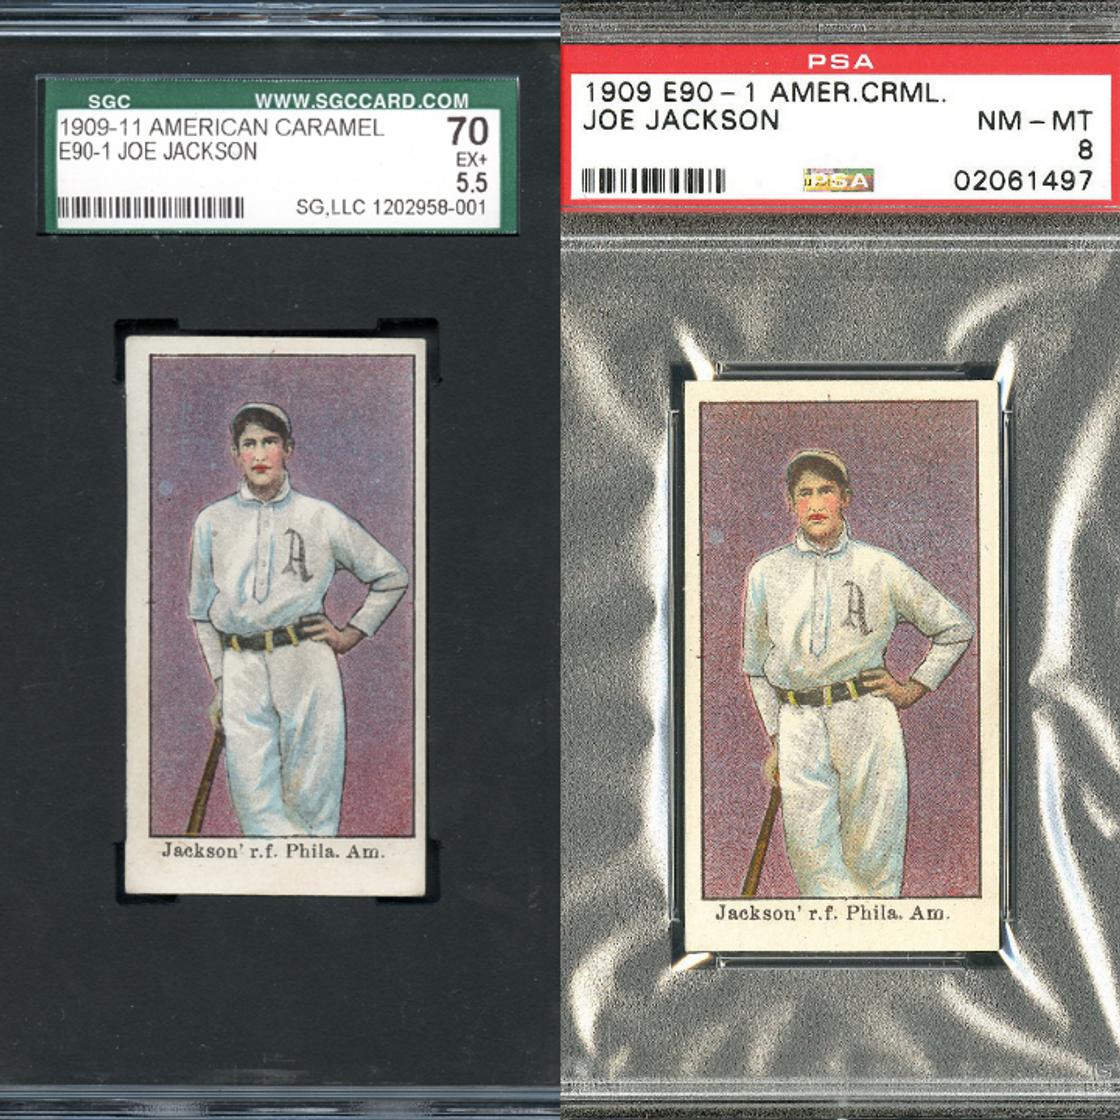 How to find rare baseball cards